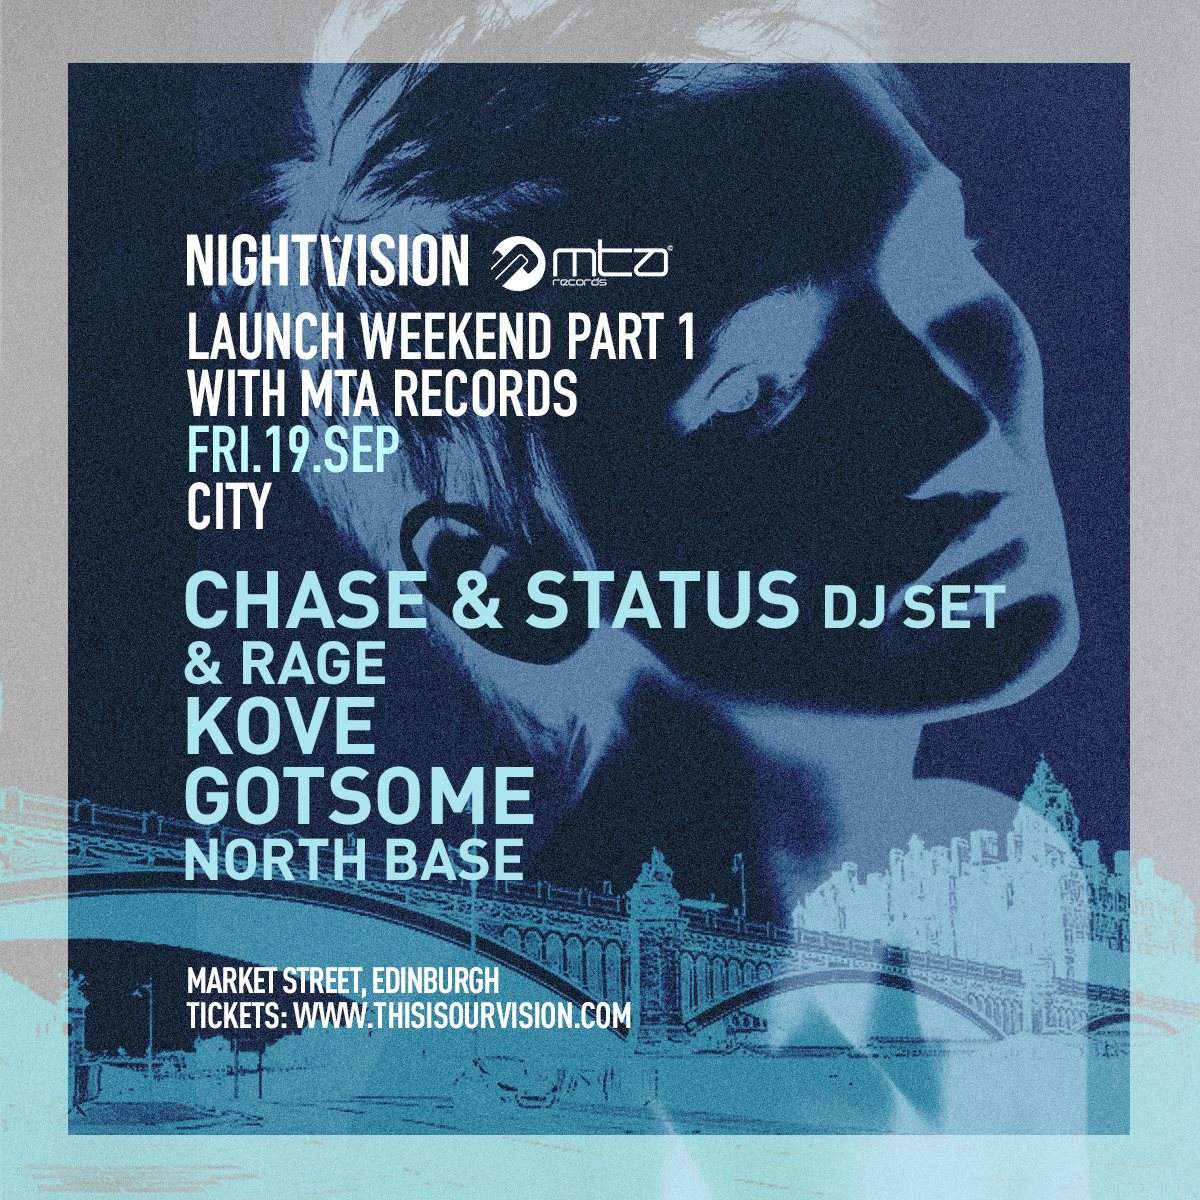 Nightvision Launch Weekend Part 1 with MTA Records -  Chase & Status (DJ Set), Kove, GotSome - Página frontal